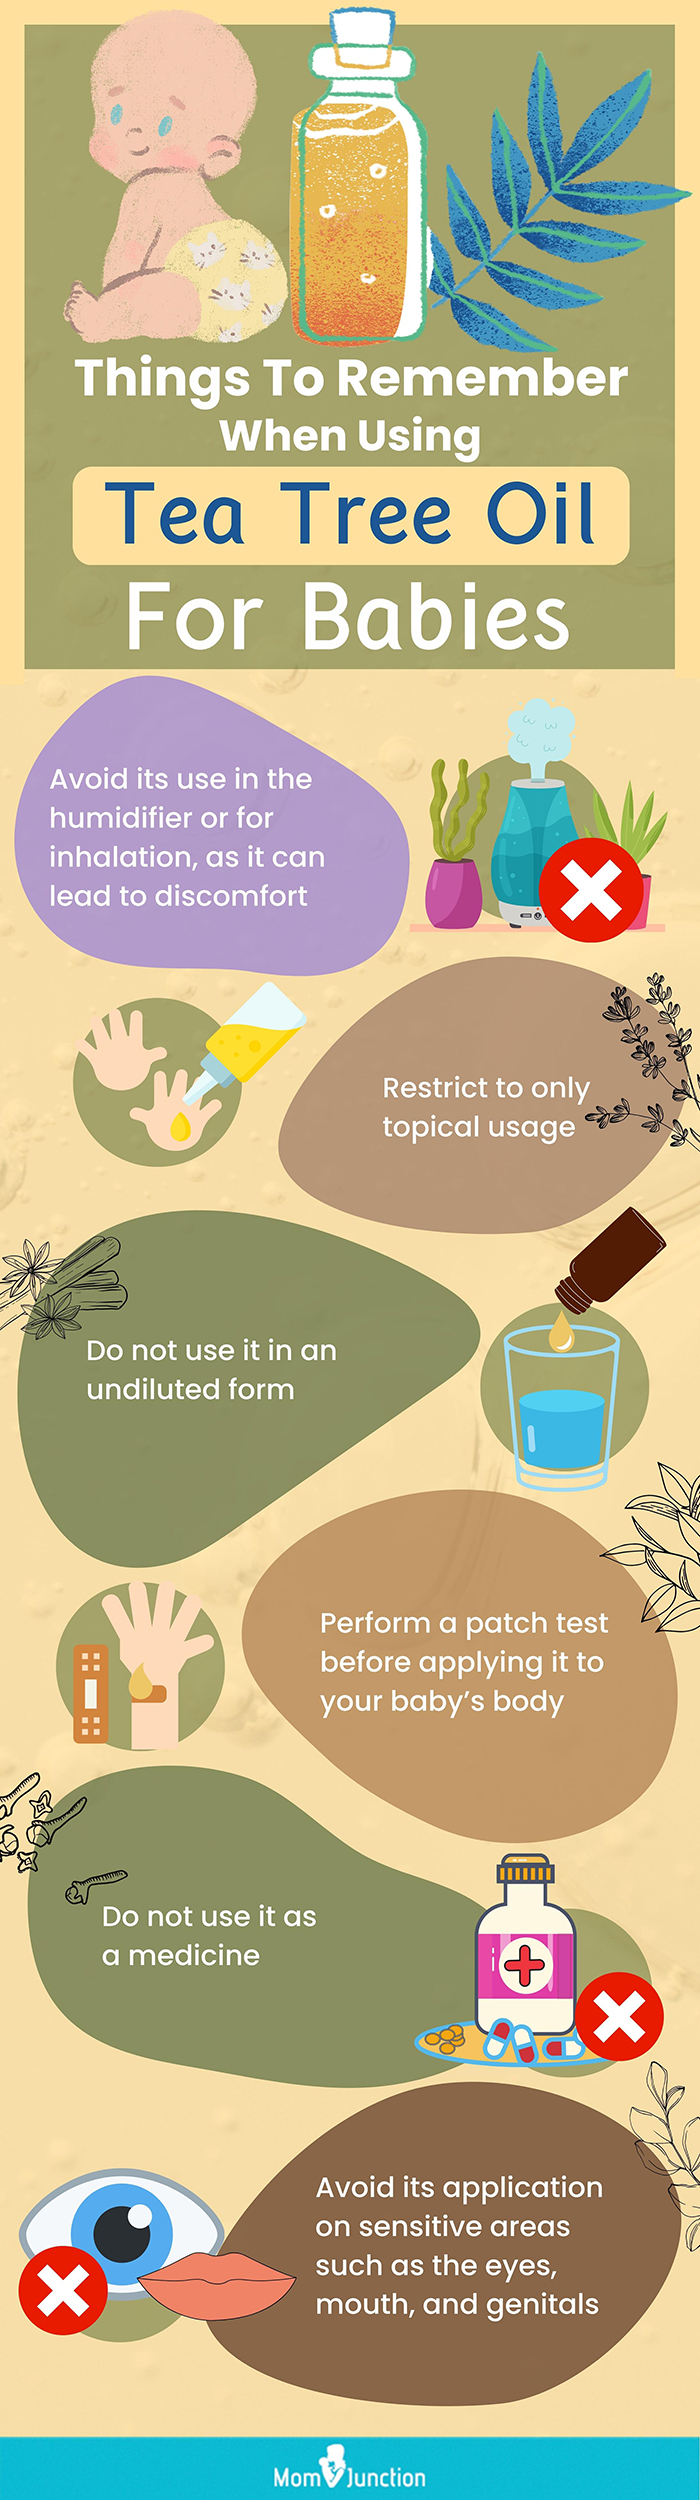 things to remember when using tea tree oil for babies (infographic)